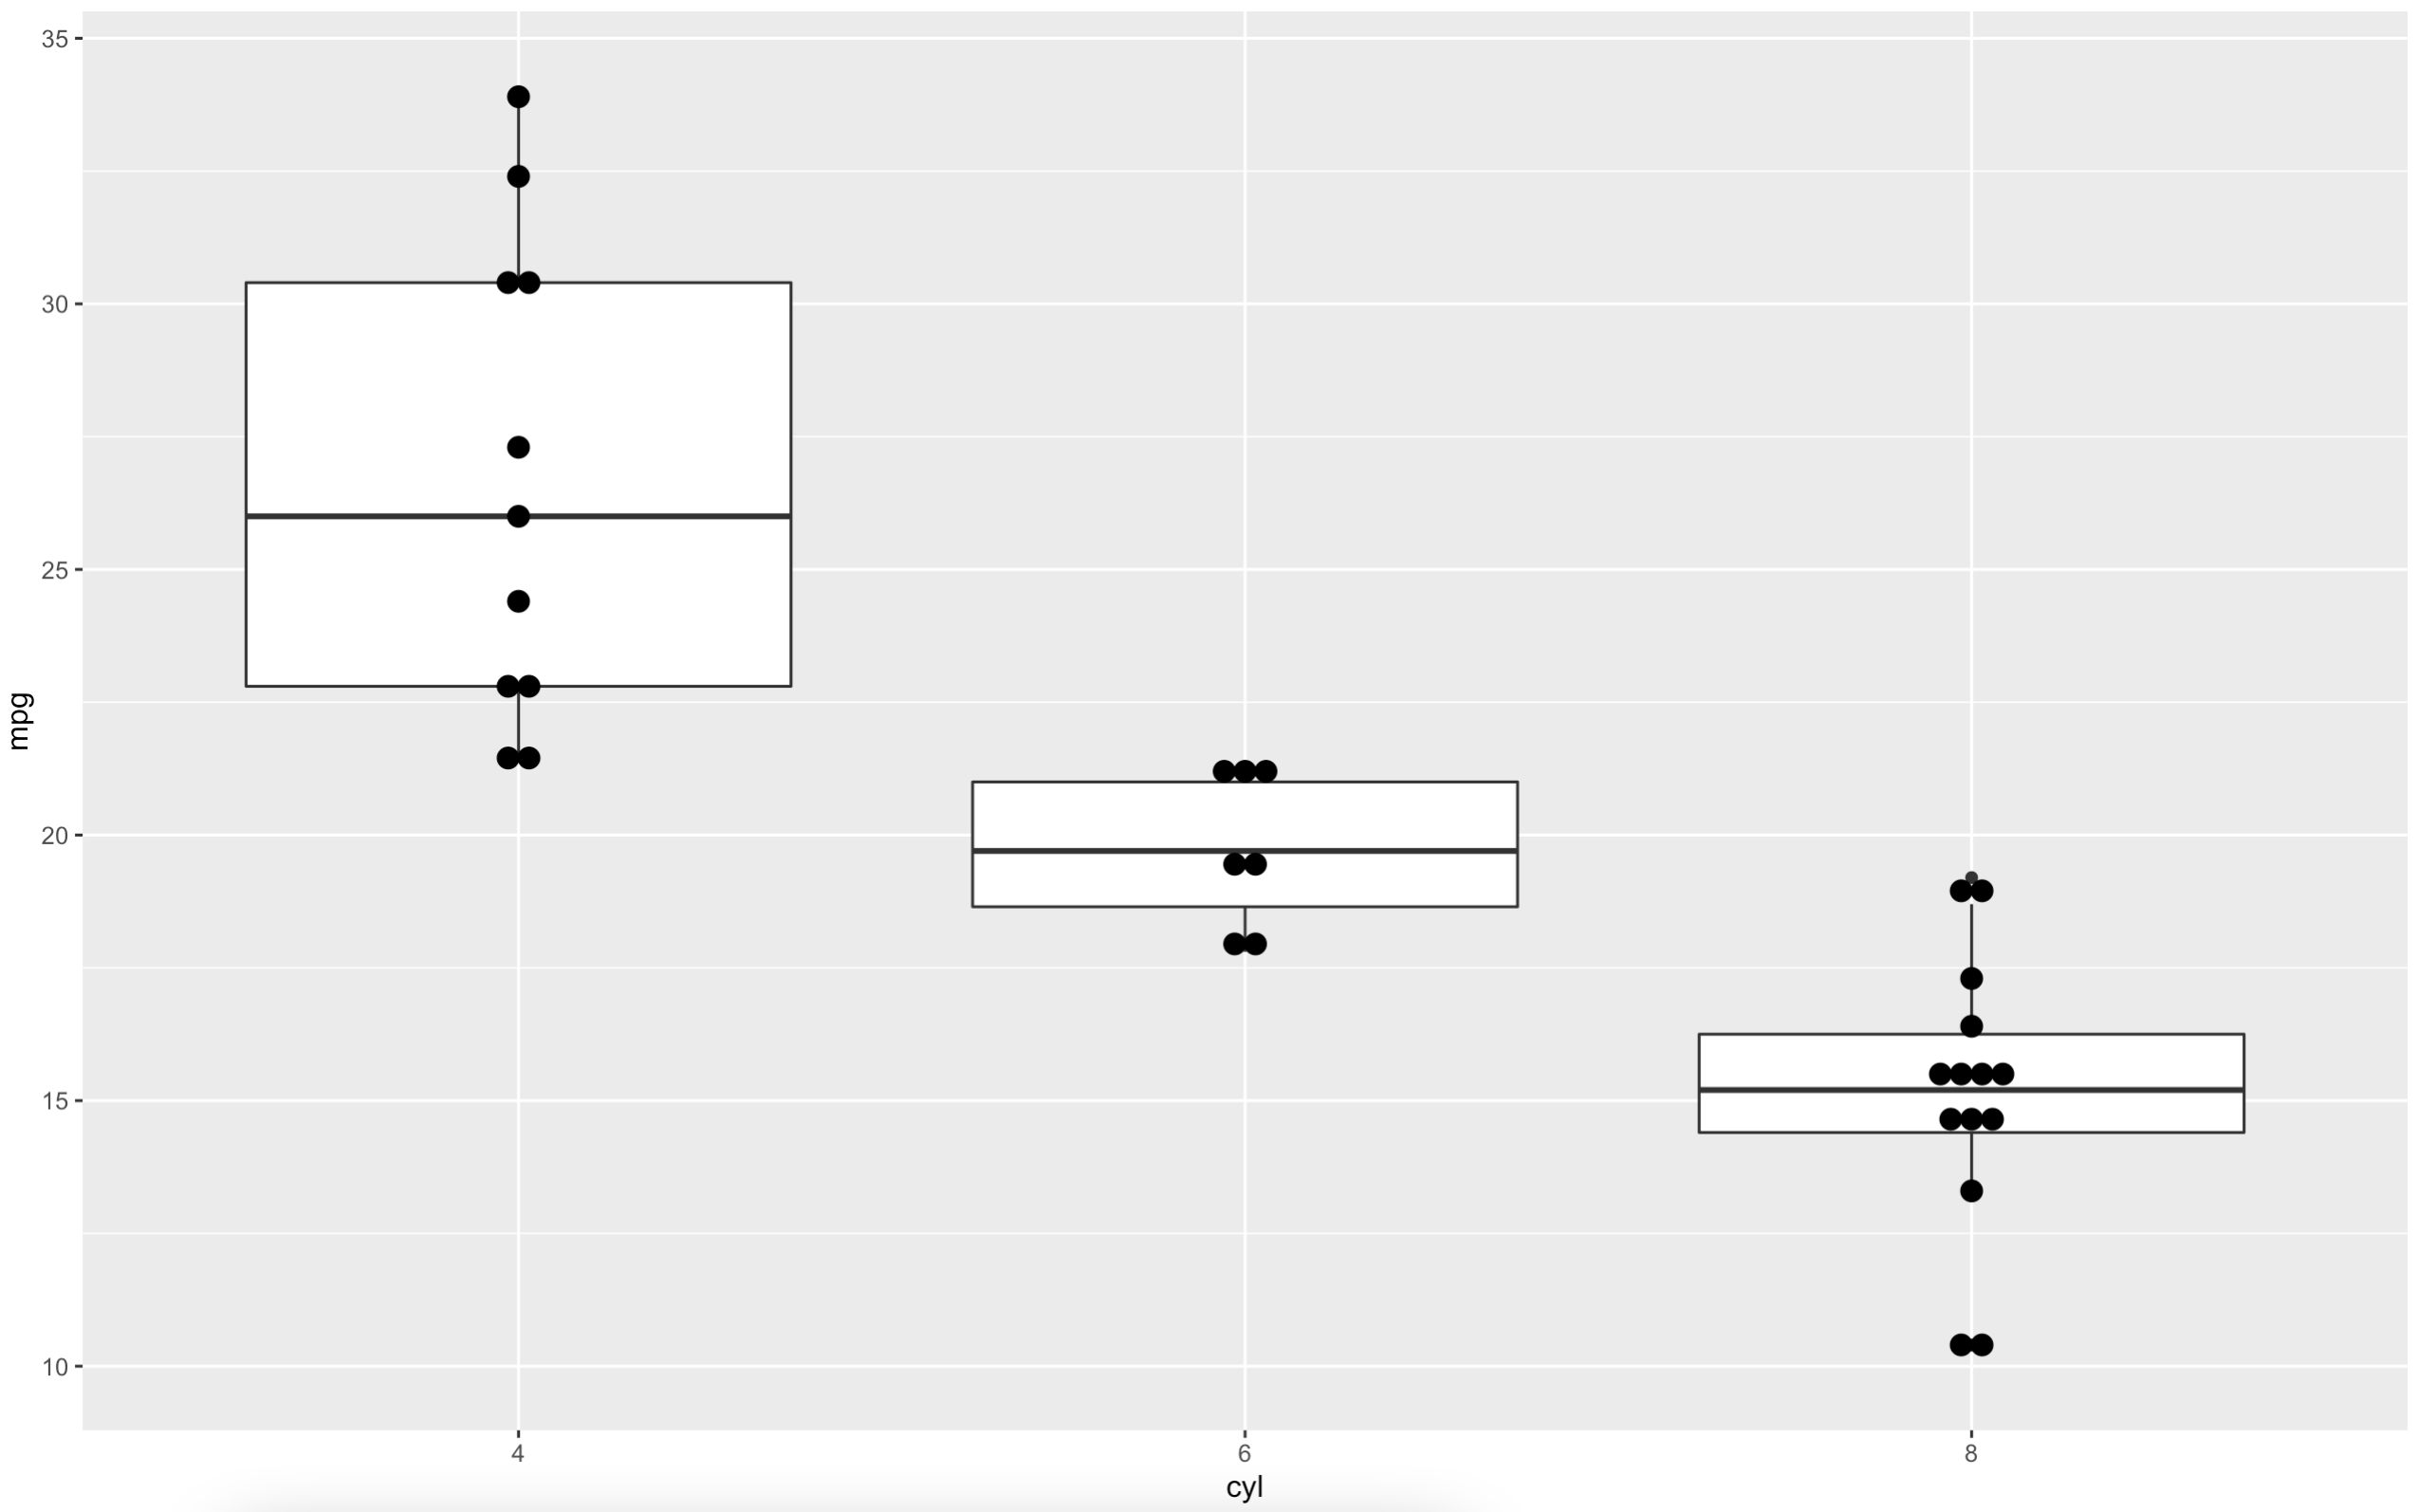 Image 6 - Displaying all data points on the boxplot